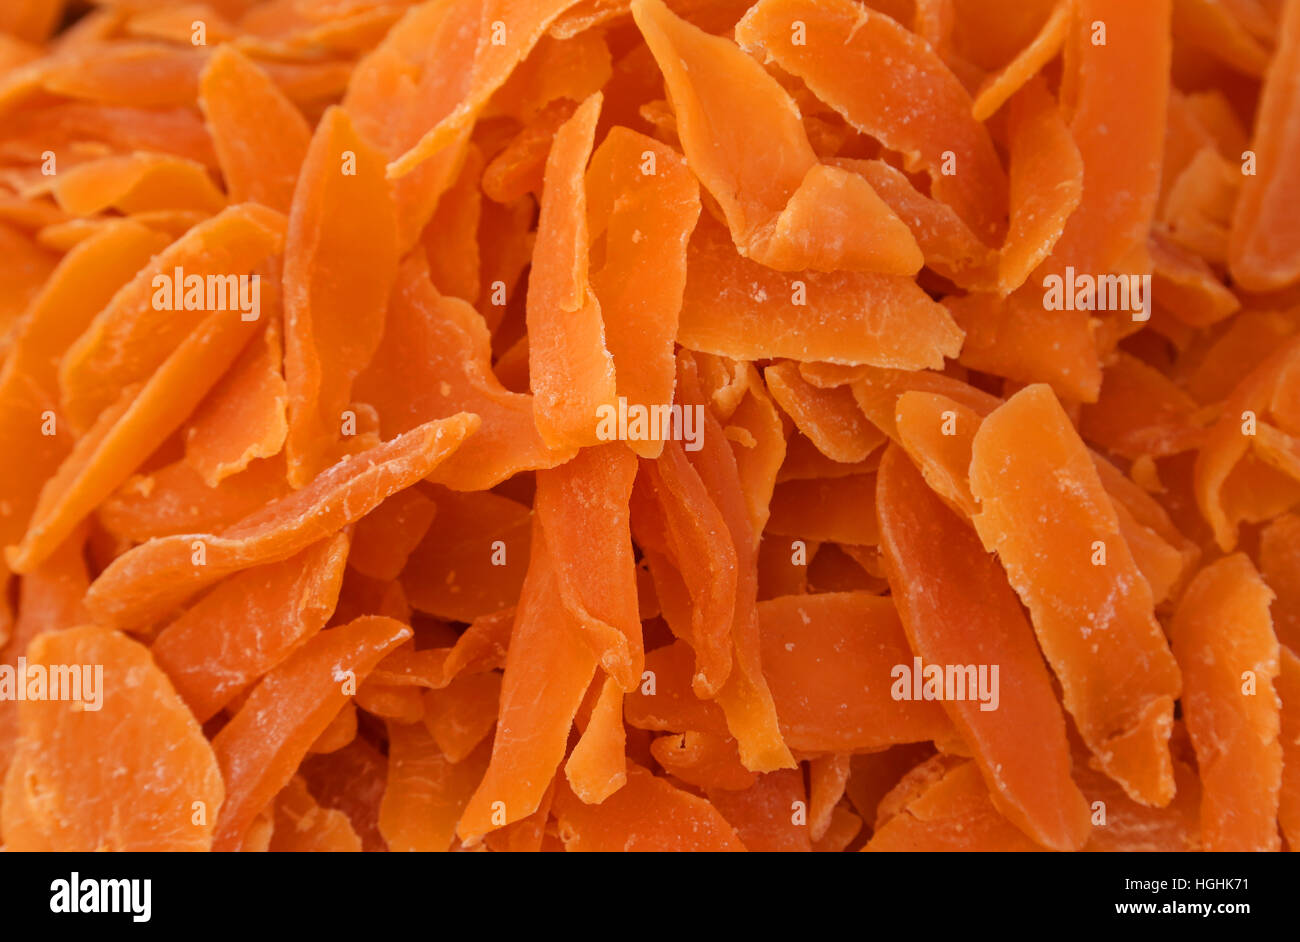 background of dried fruit and dried orange Stock Photo